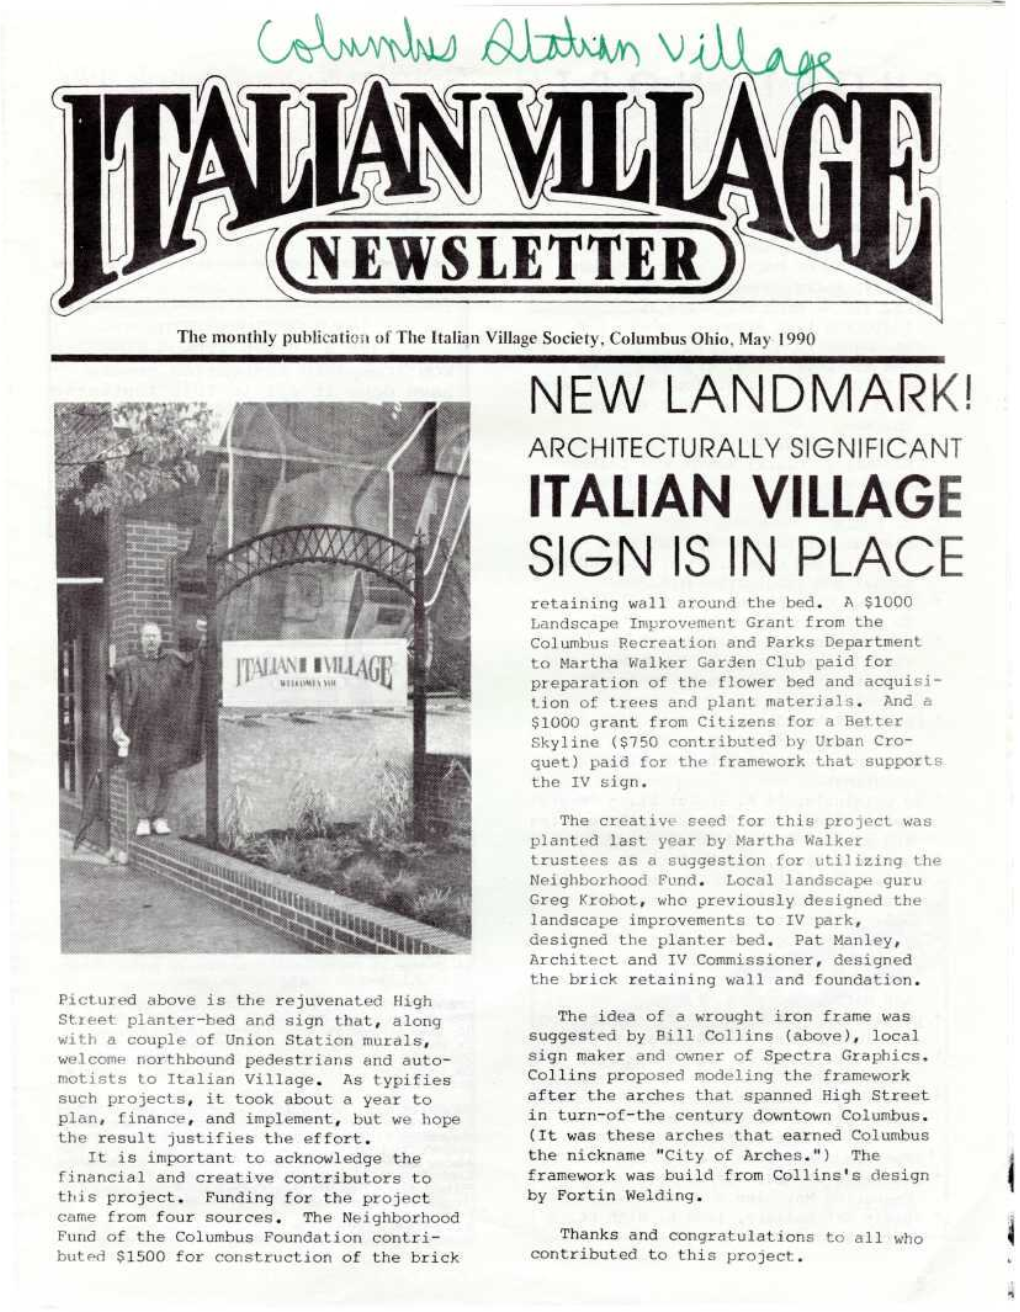 Italian Village Society, Columbus Ohio, May 1990 NEW LANDMARK! ARCHITECTURALLY SIGNIFICANT ITALIAN VILLAGE SIGN IS in PLACE Retaining Wall Around the Bed